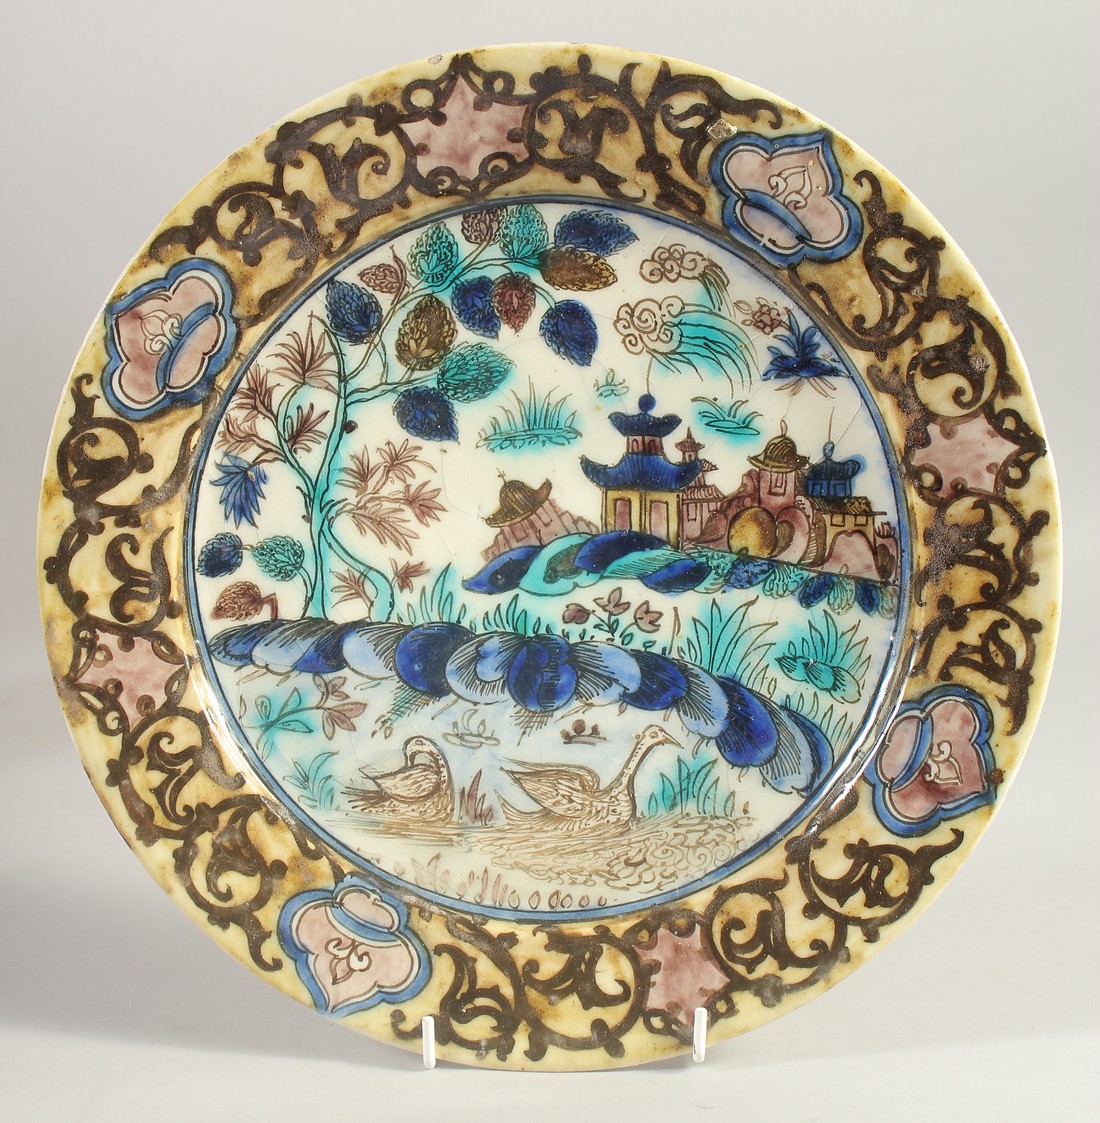 A RARE AND UNUSUAL PERSIAN - CHINESE MARKET GLAZED POTTERY DISH, 30cm diameter.